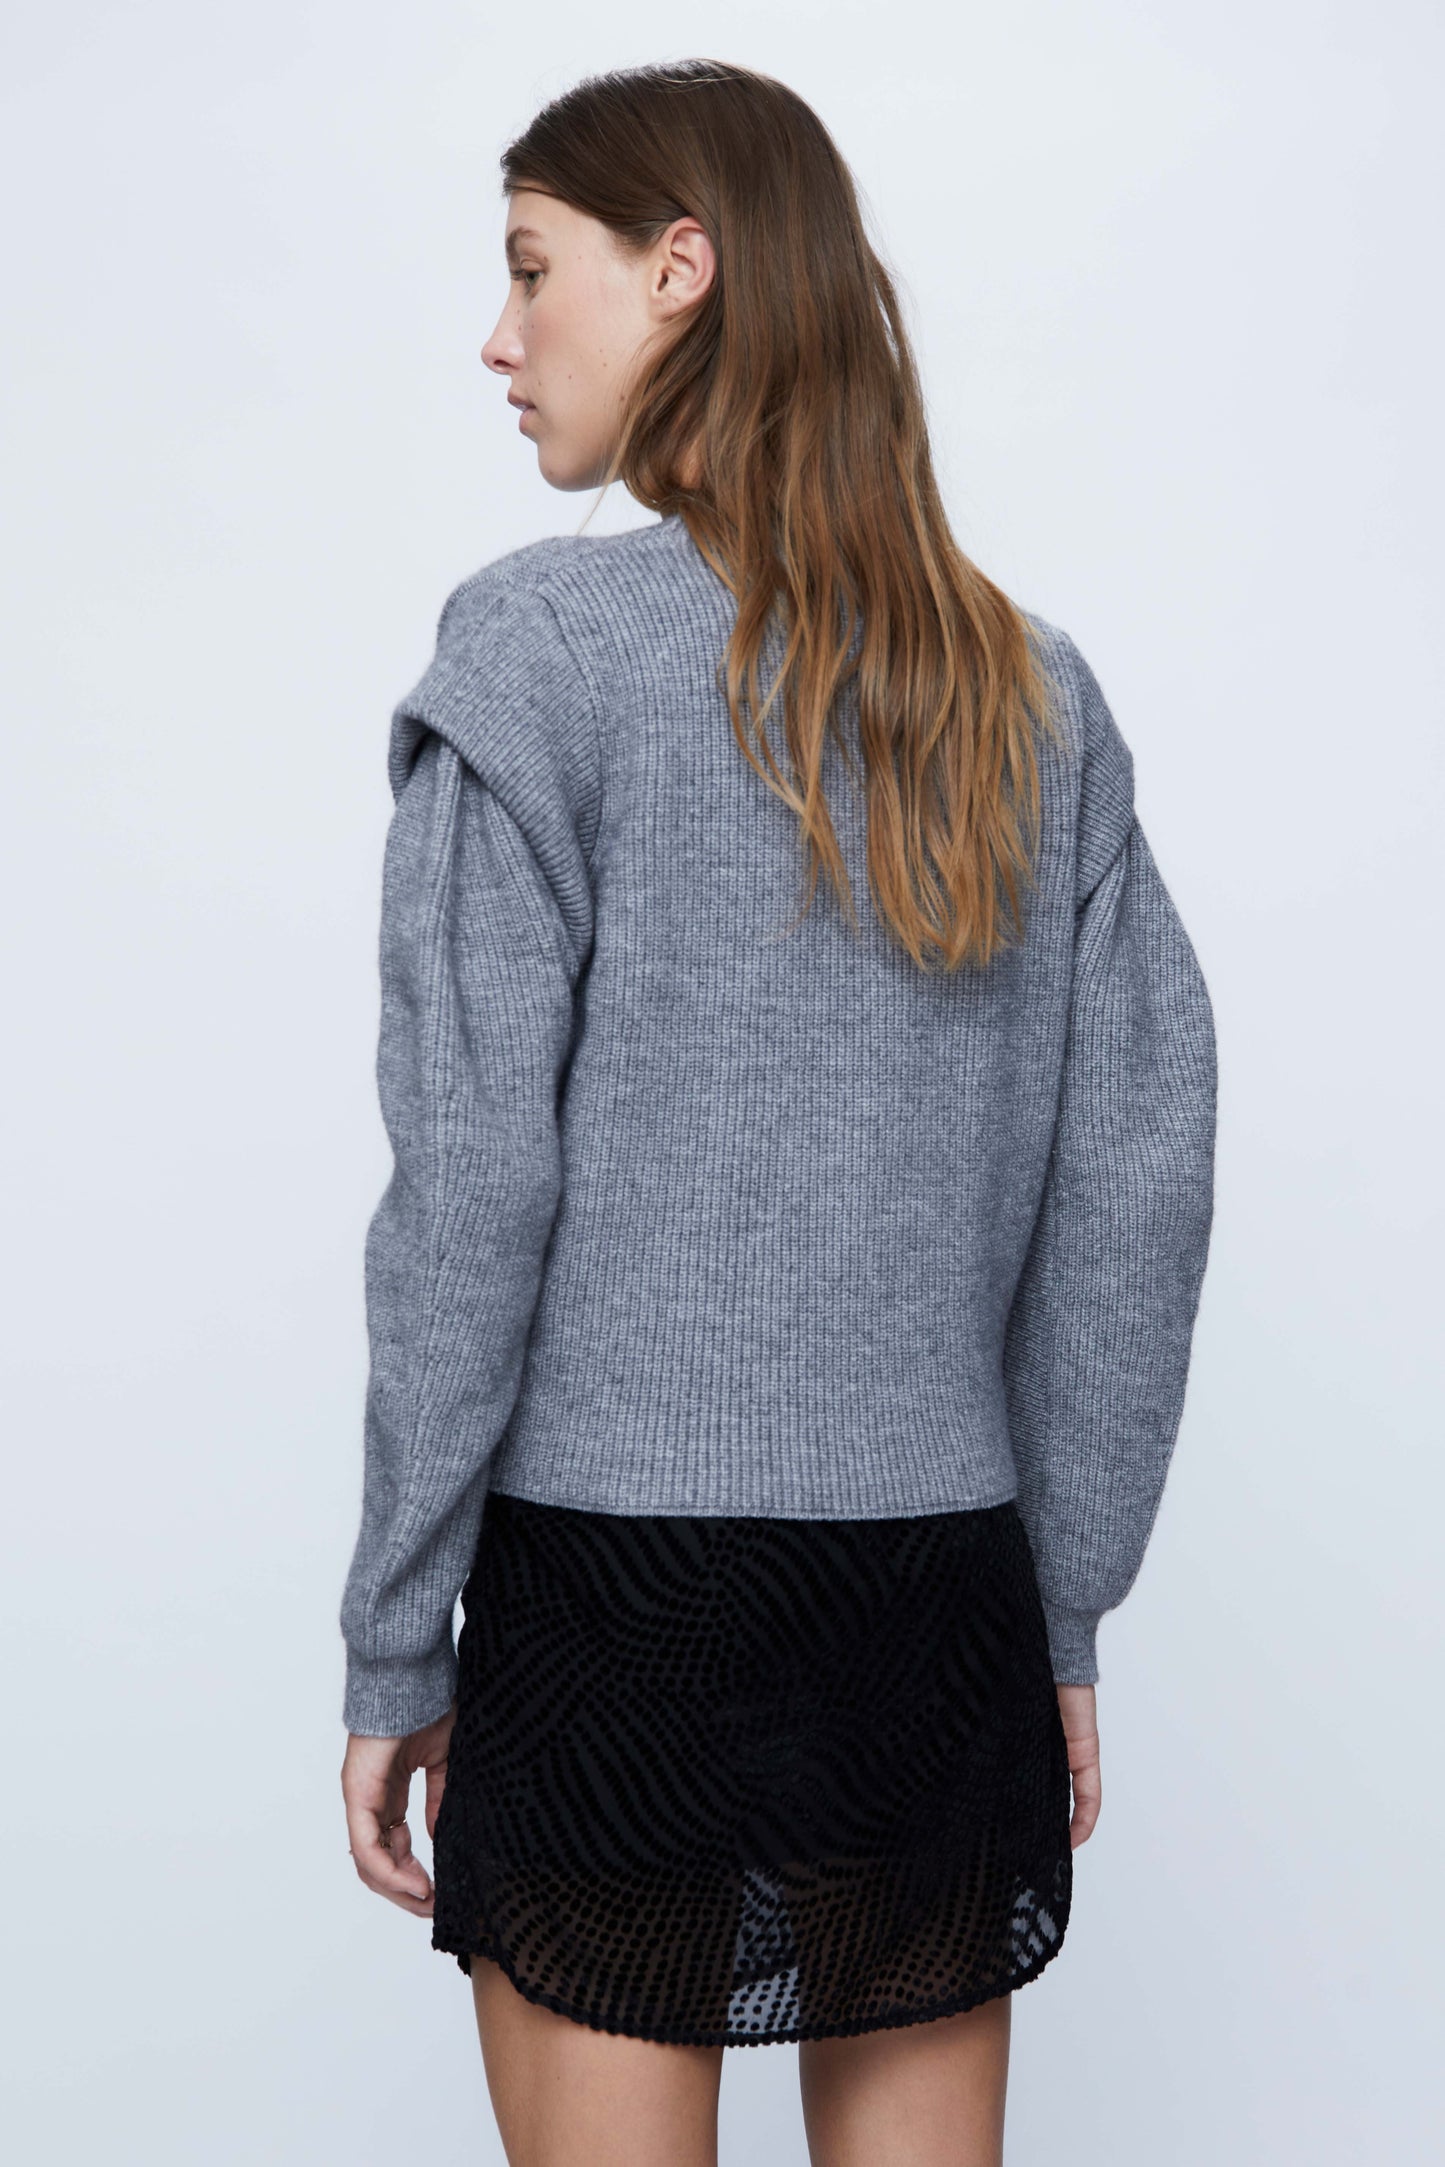 Knitted sweater with gray shoulder detail